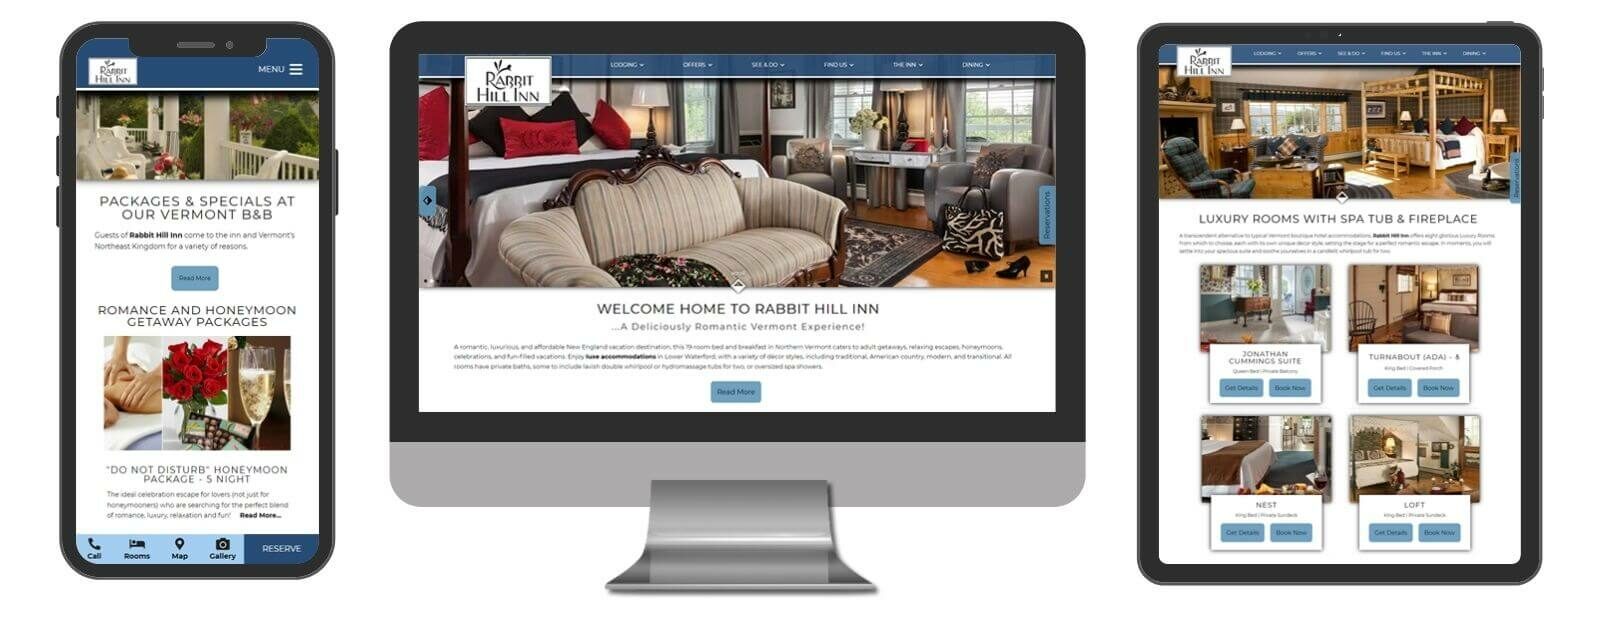 Rabbit Hill Inn website displayed in 3 sizes - mobile, template and desktop